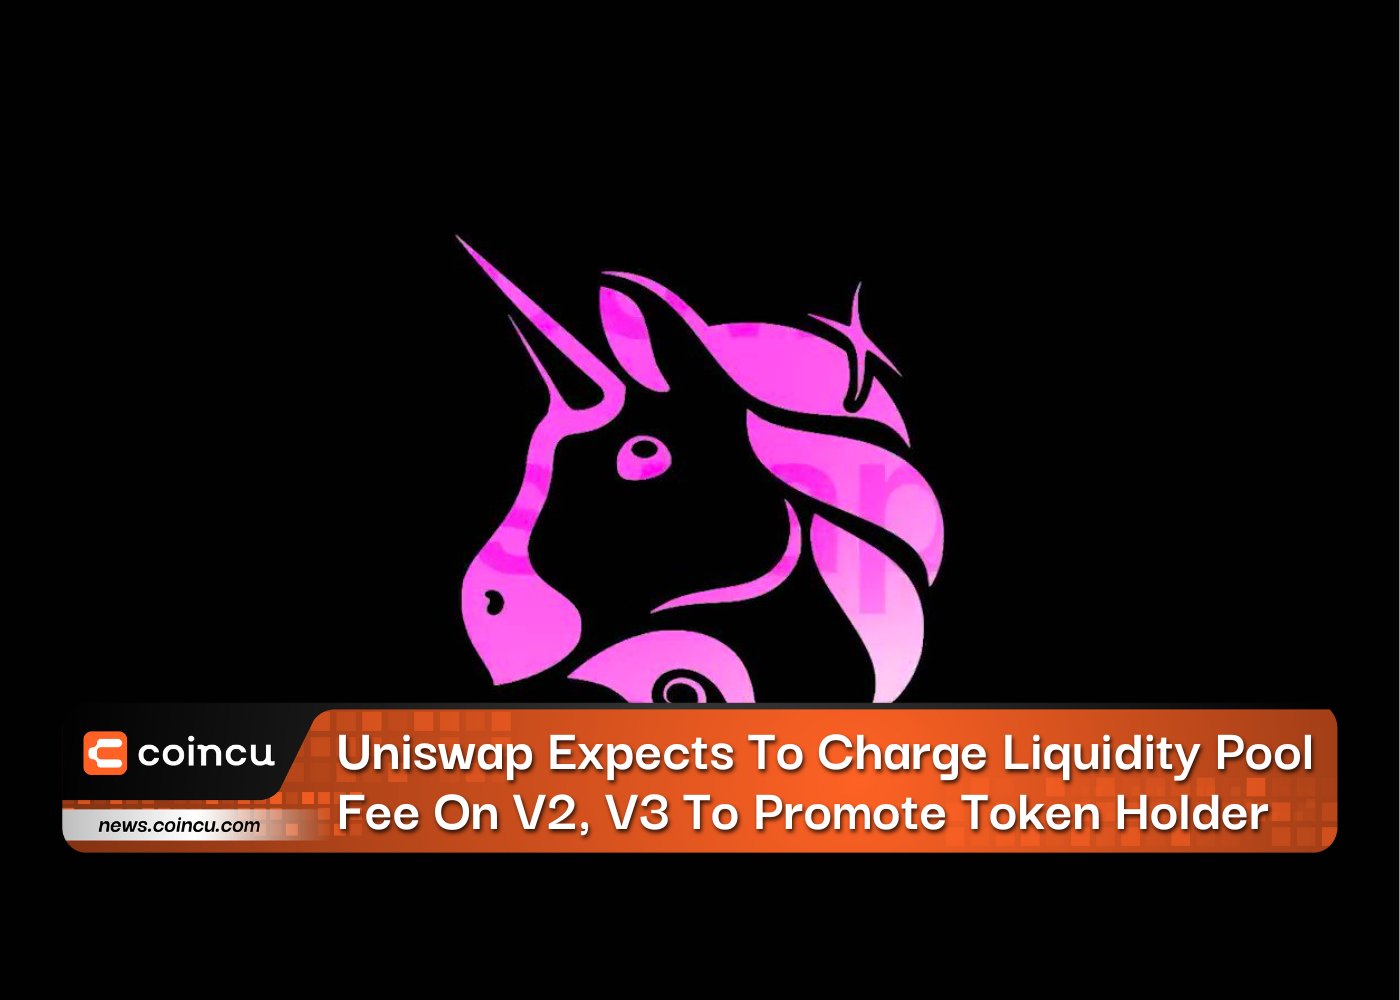 Uniswap Expects To Charge Liquidity Pool Fee On V2, V3 To Promote Token Holder